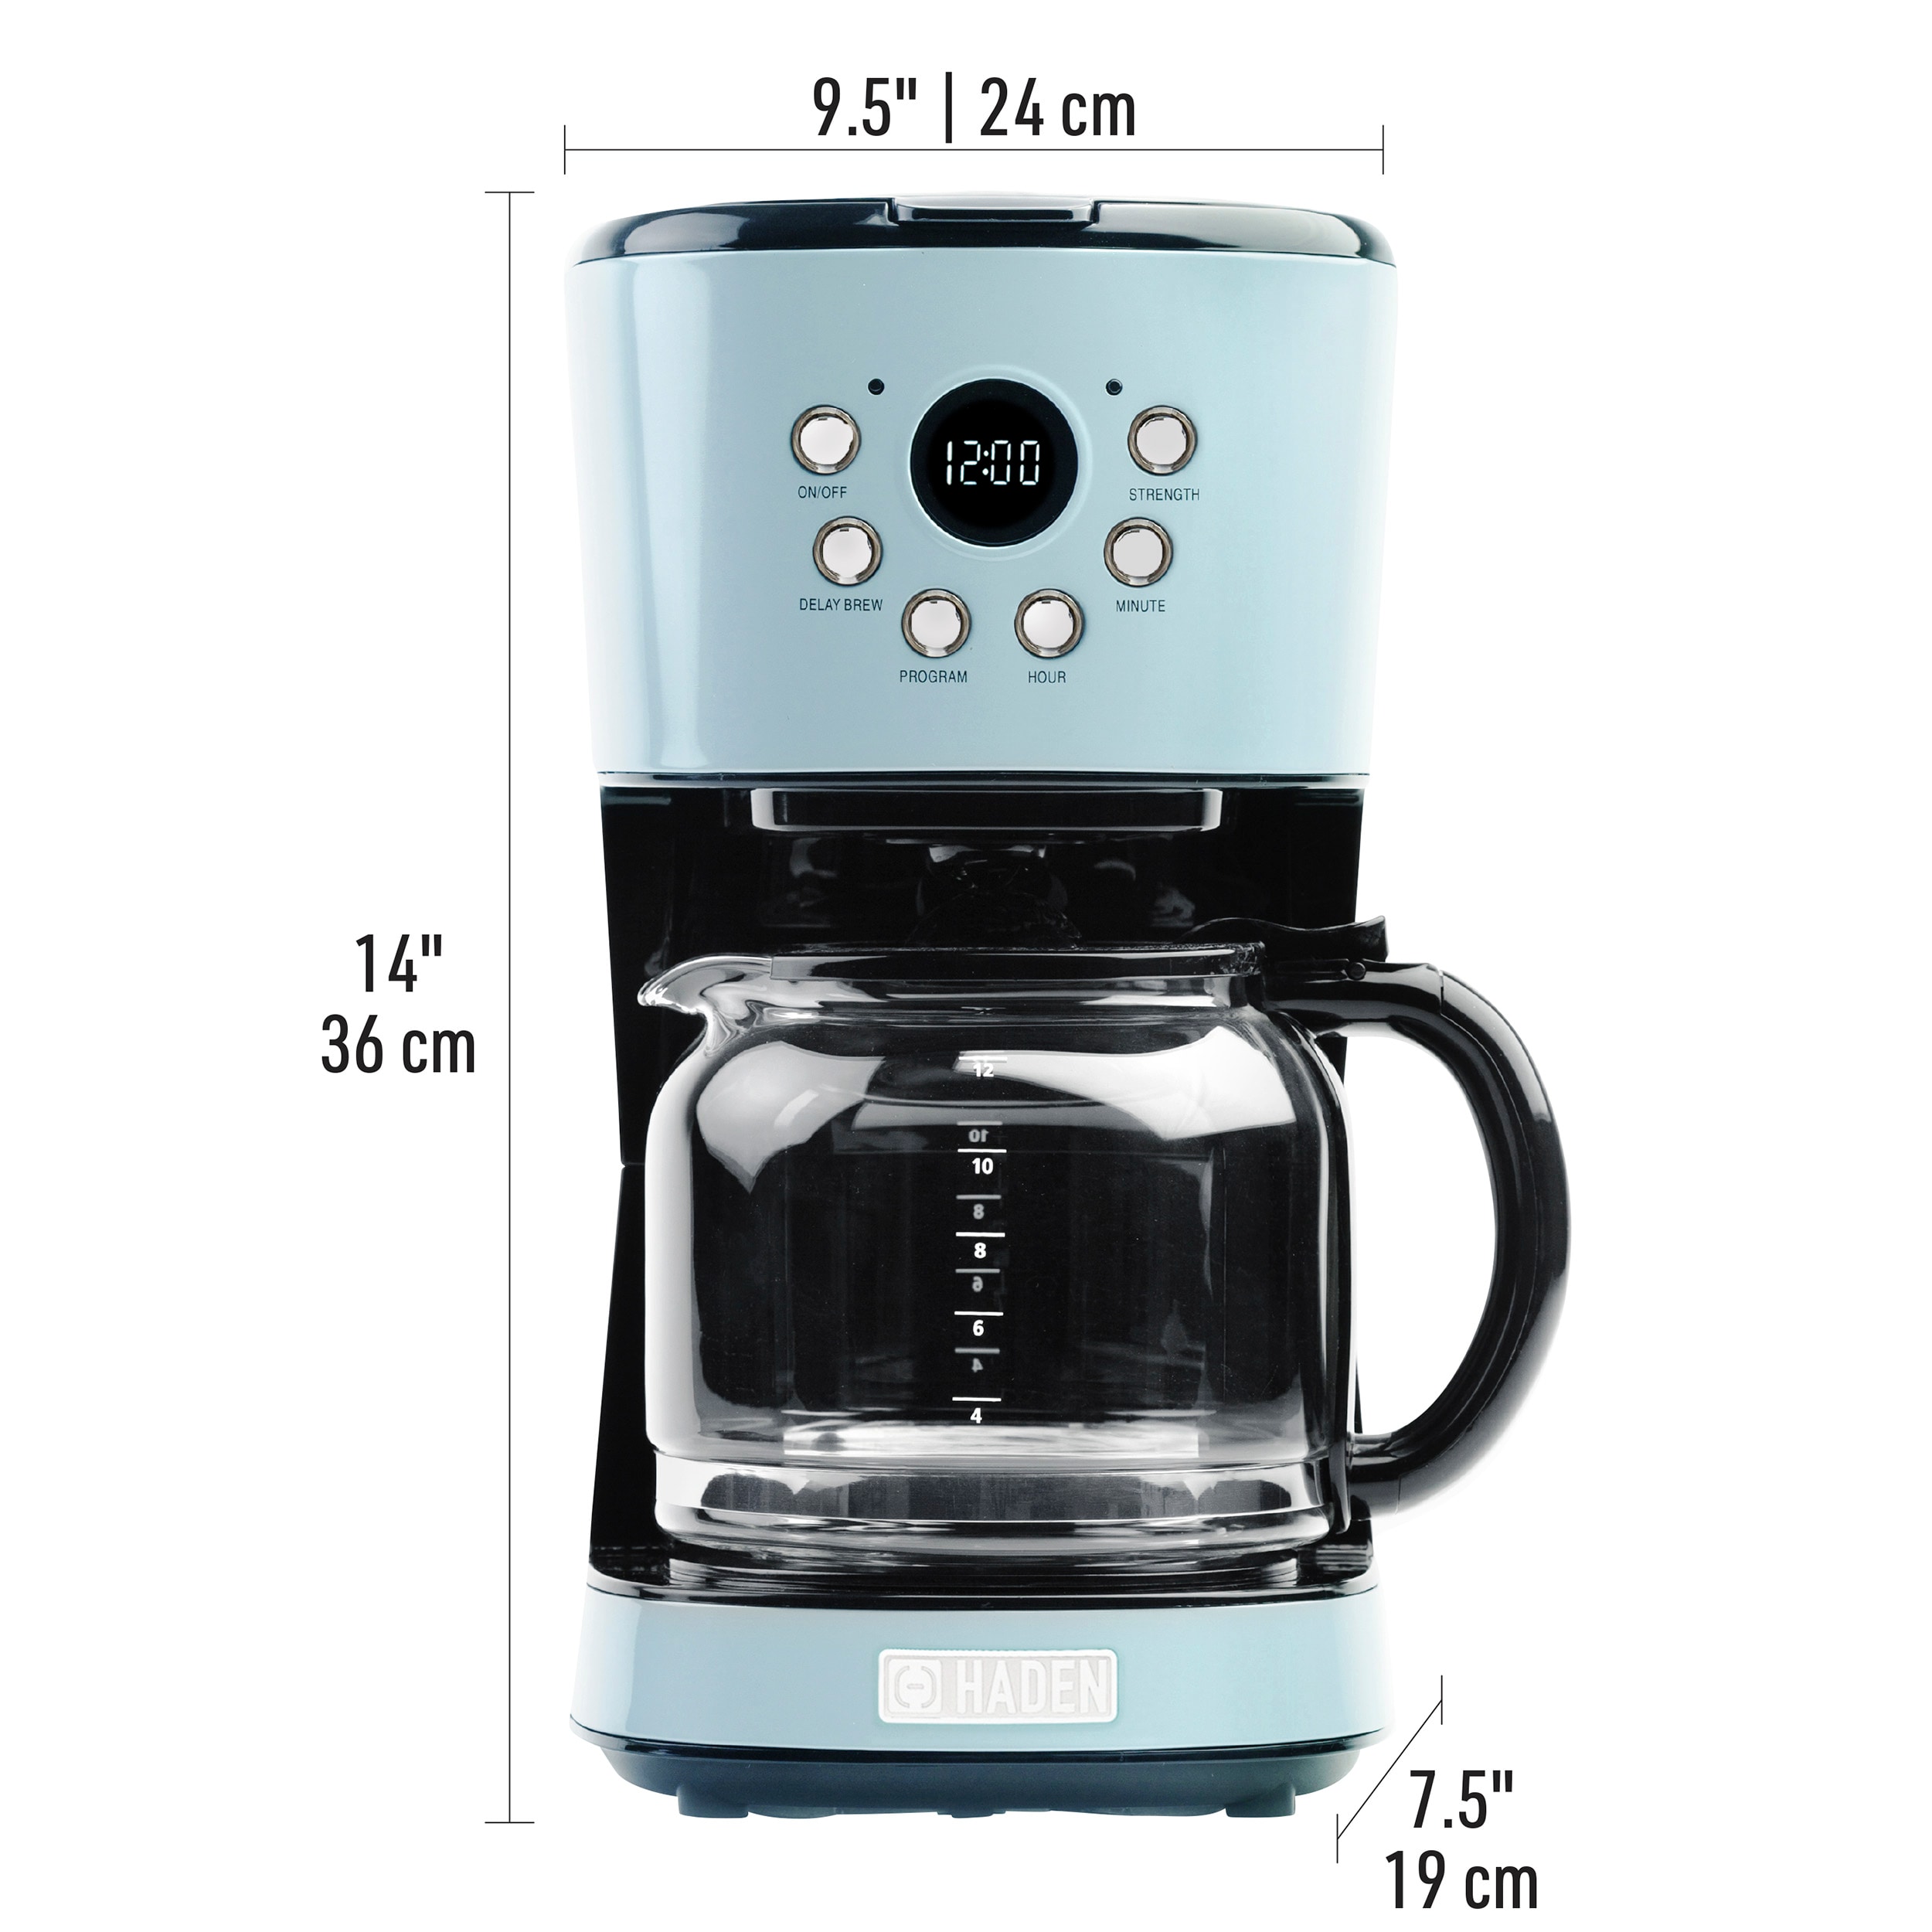 Café Specialty Drip Coffee Maker review: an elegant workhorse